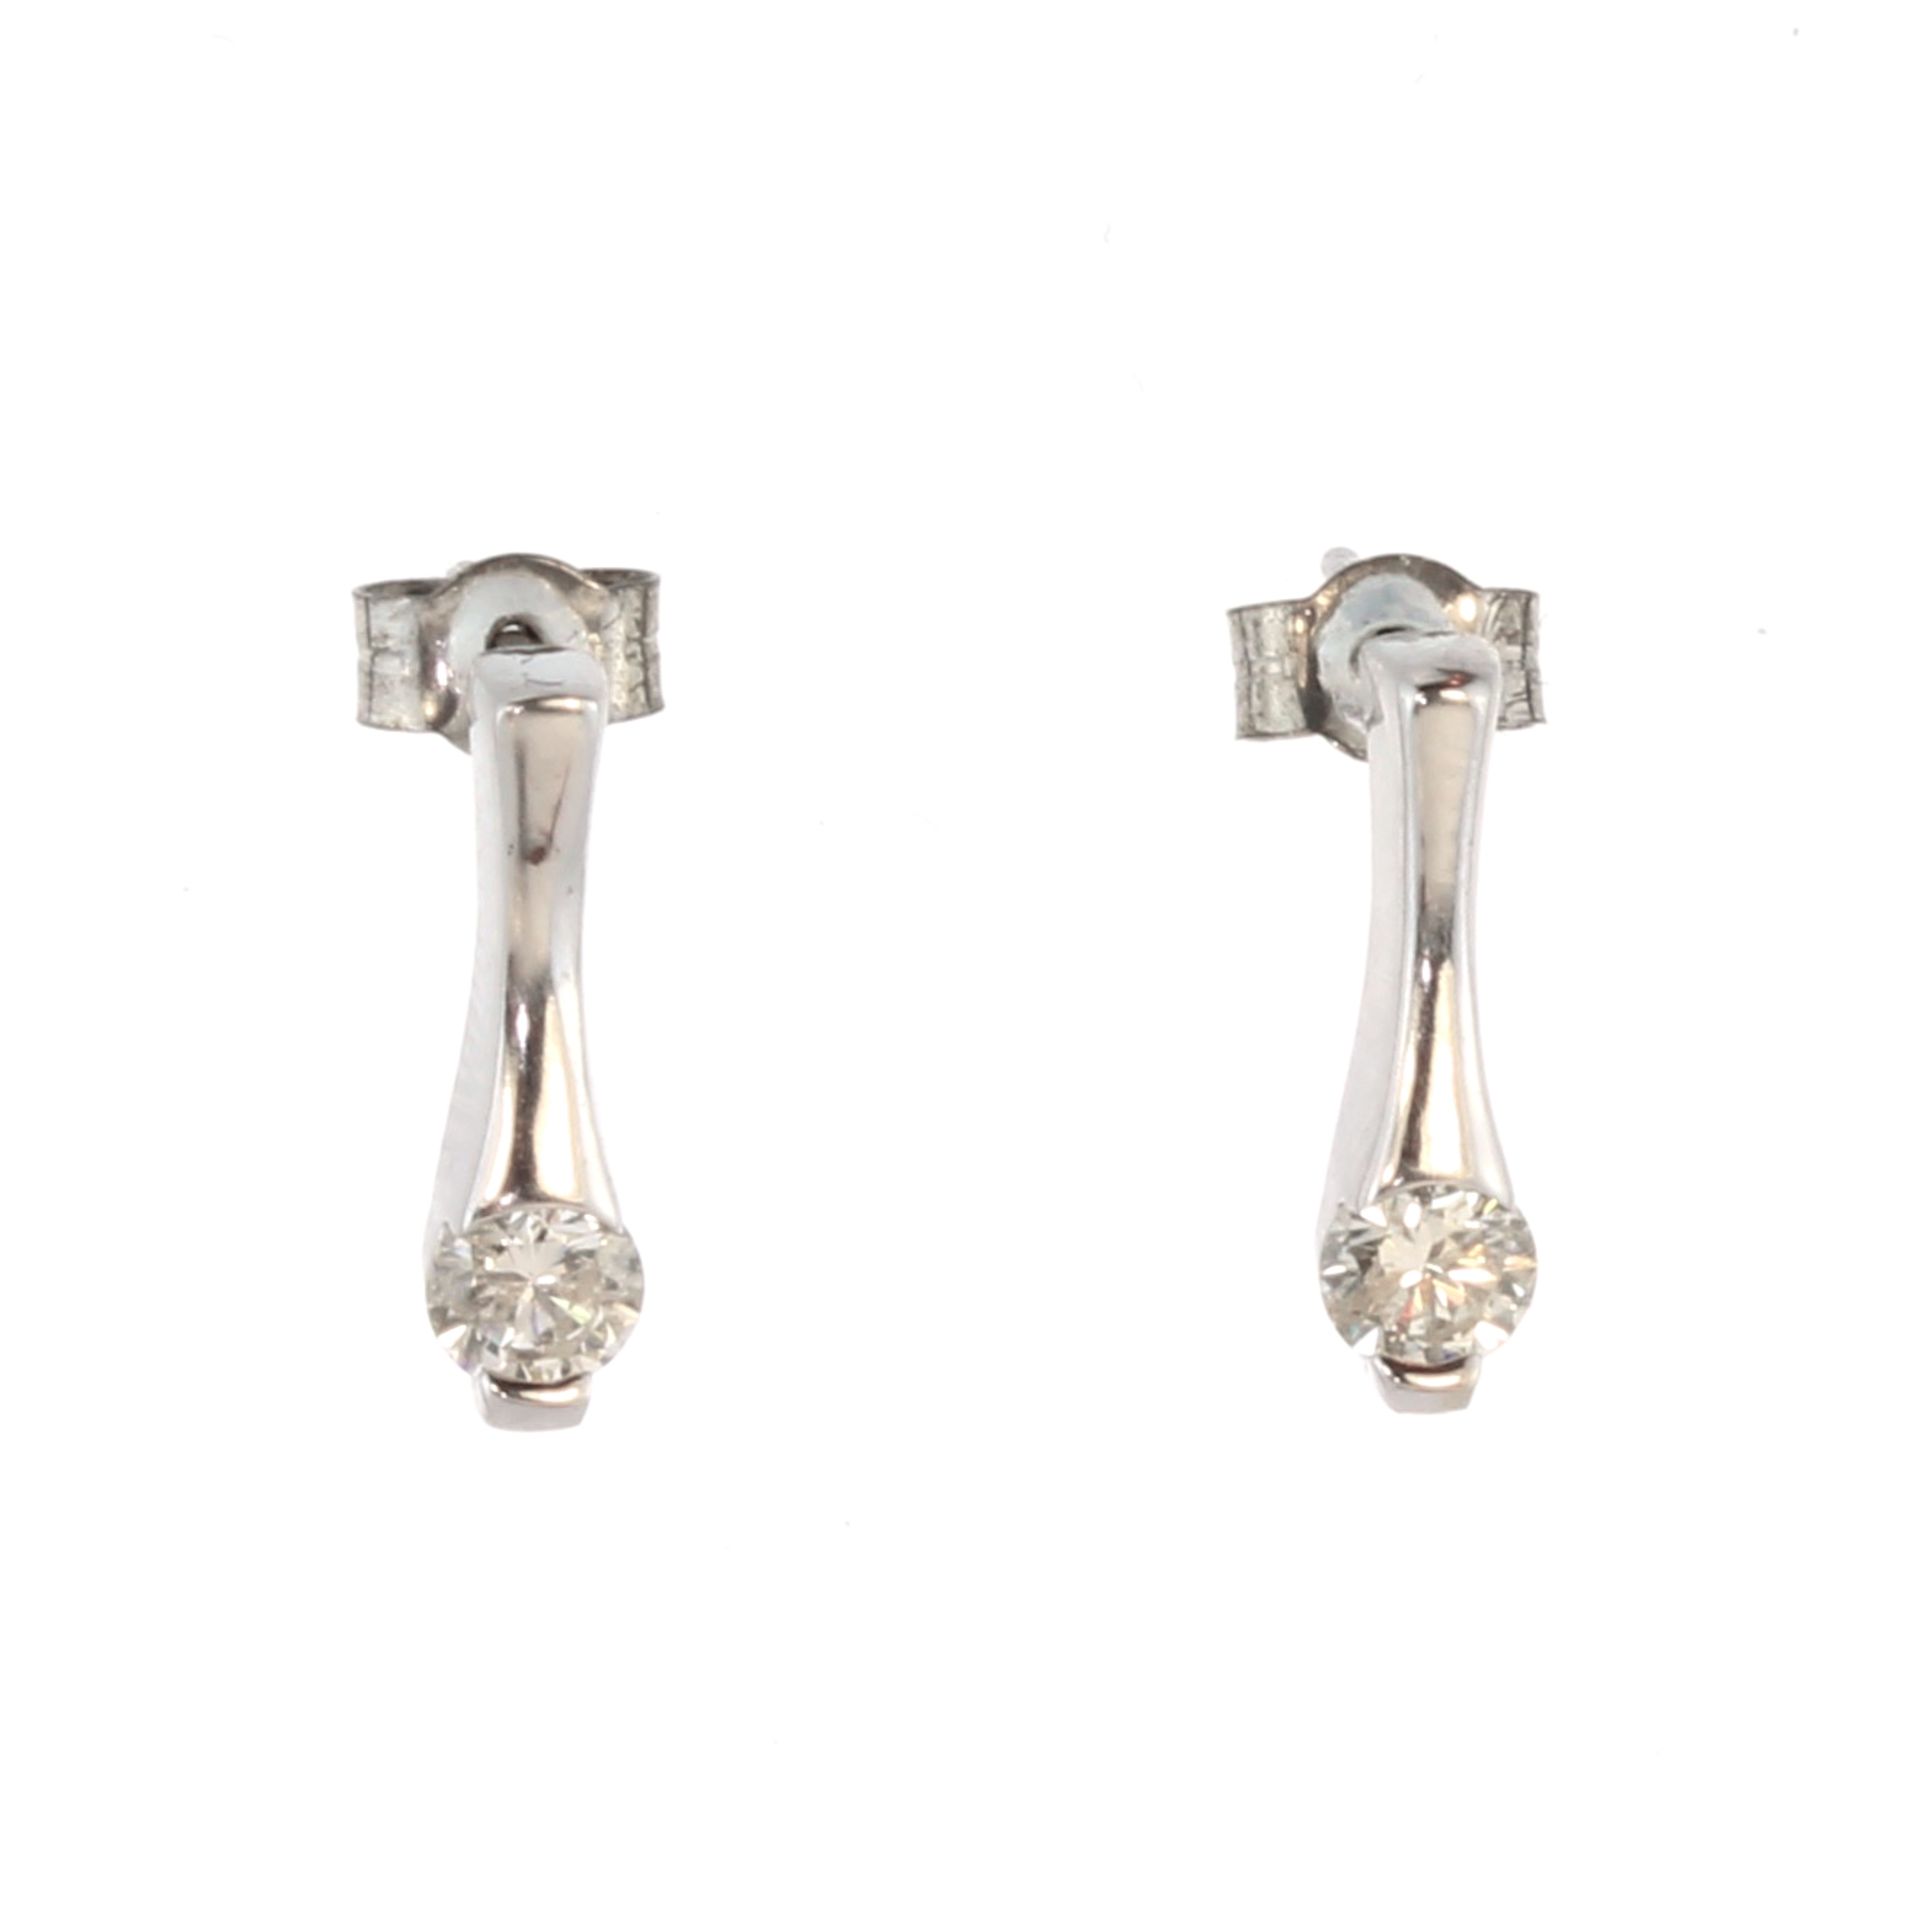 A pair of diamond drop earrings in 18ct white gold each set with a round cut diamond of